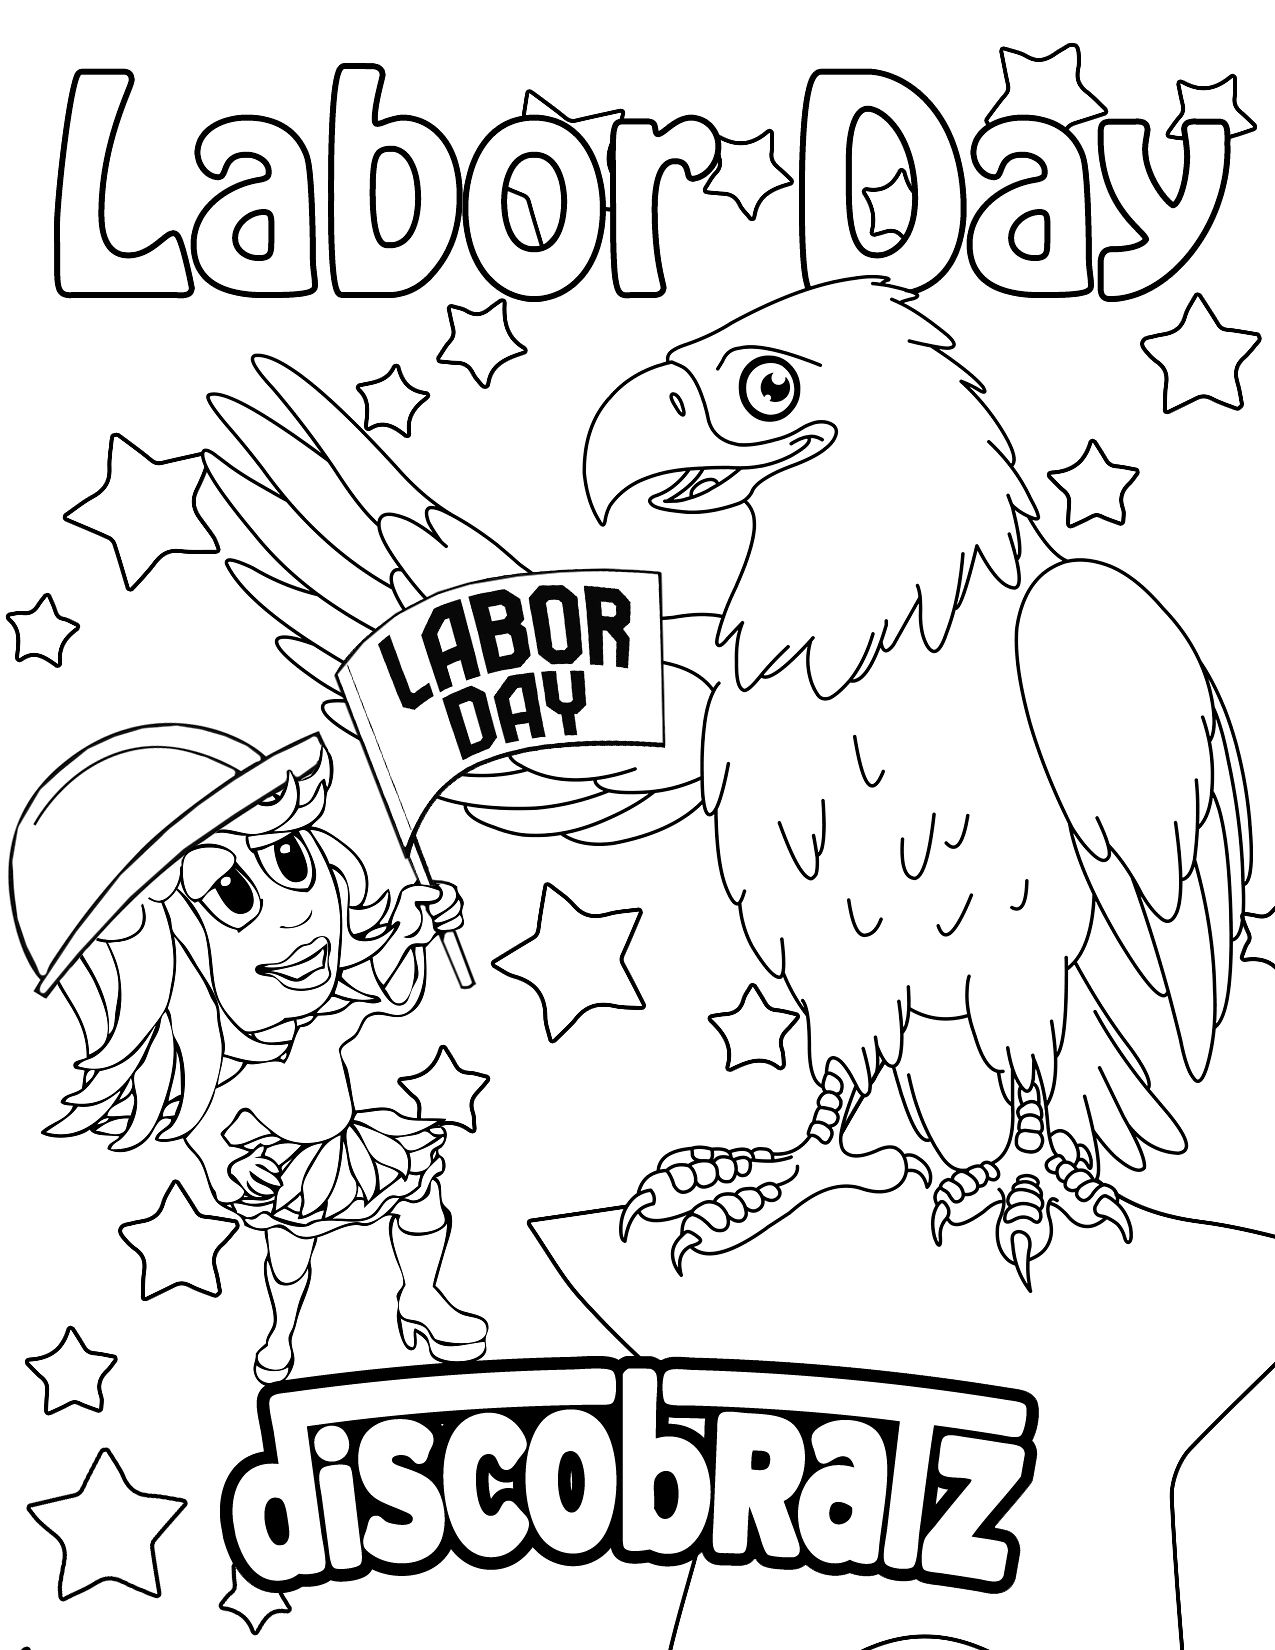 Labor Day Coloring Pages to download and print for free